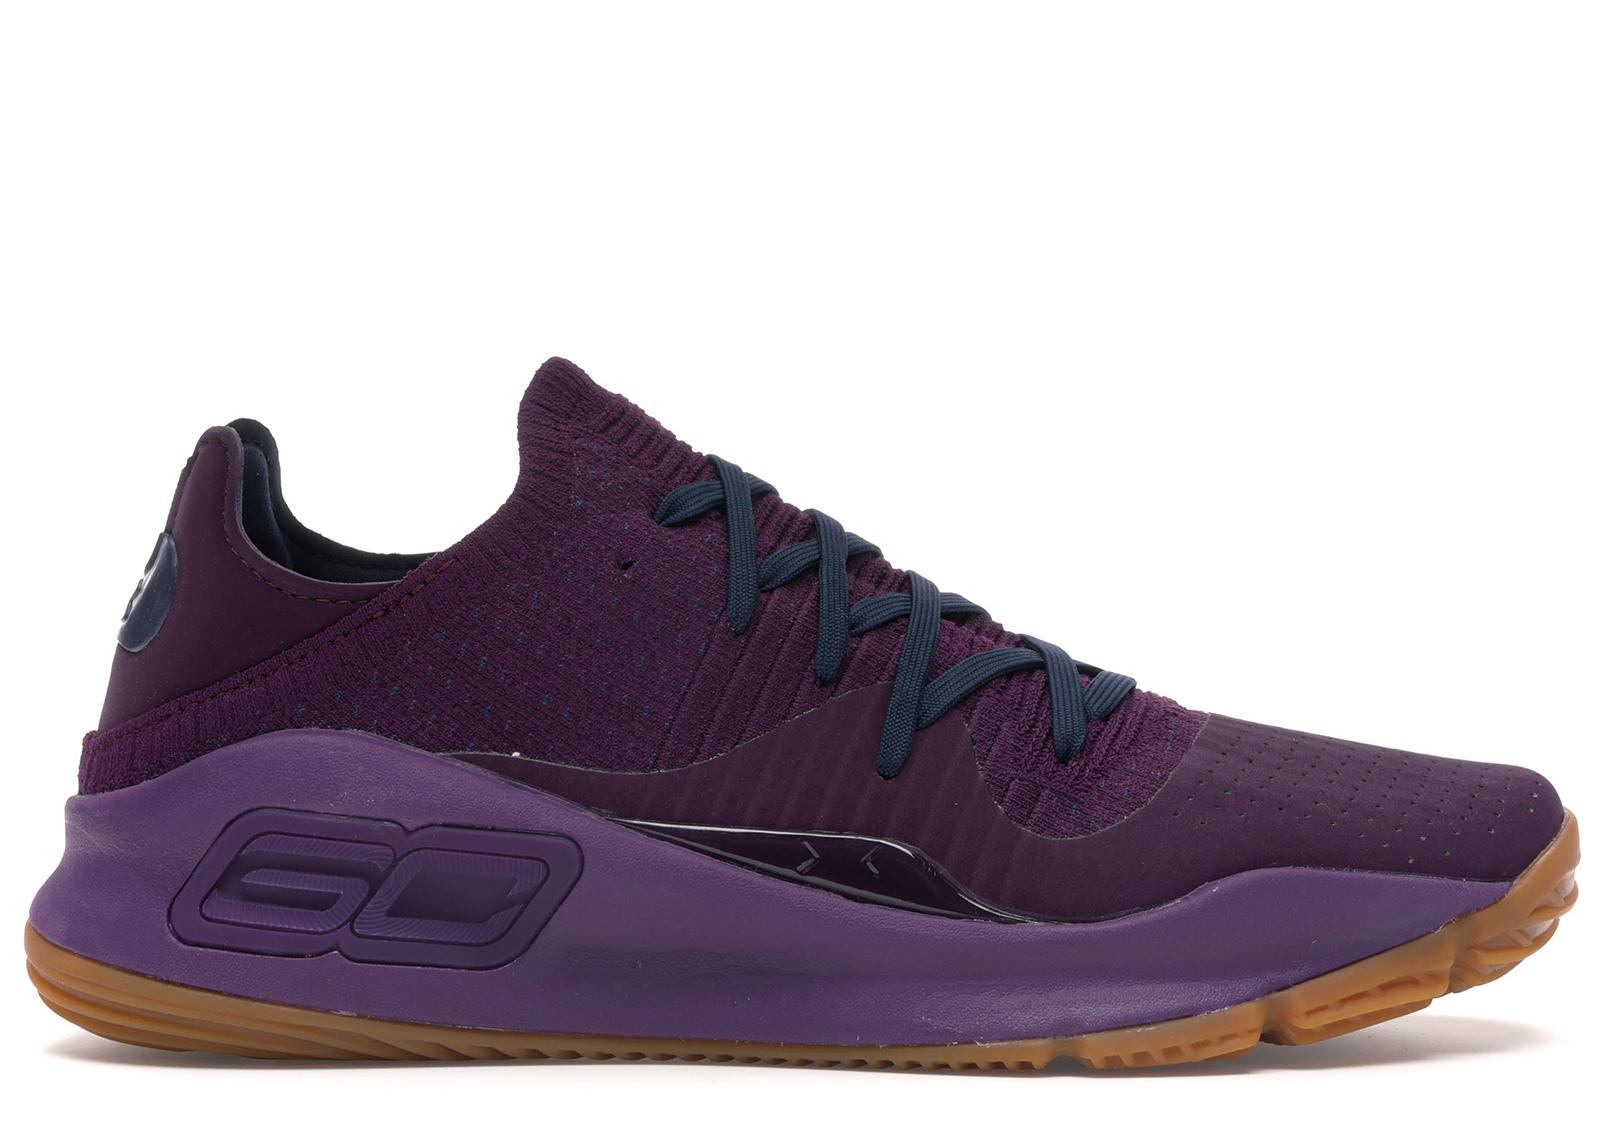 Under Armour Curry 4 Low Merlot in 